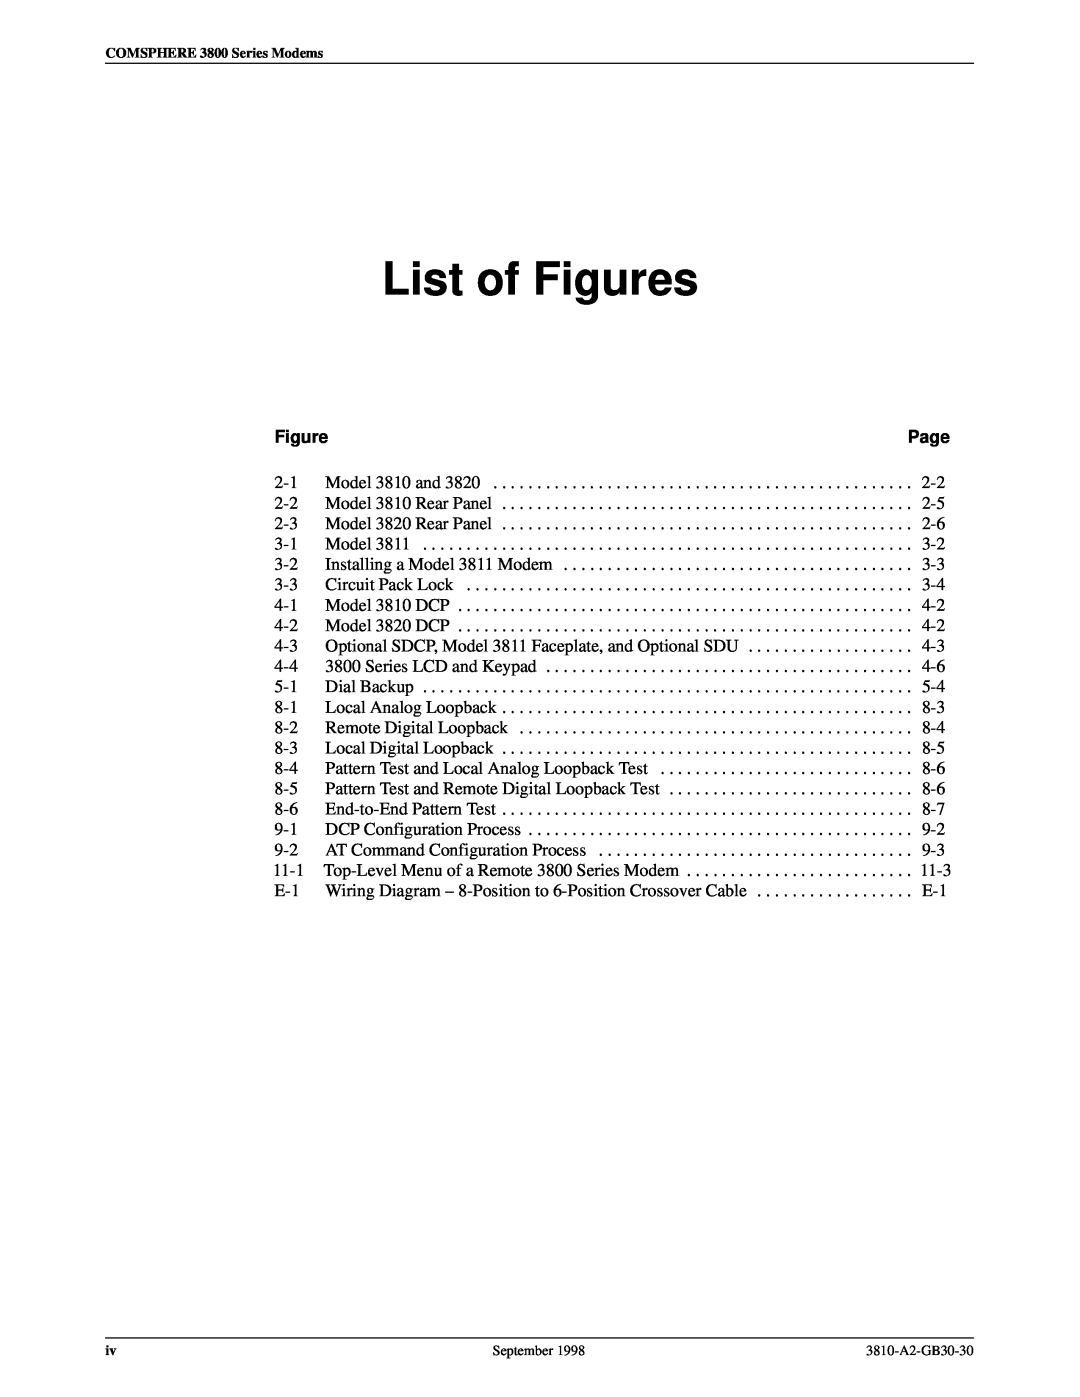 Paradyne 3800 manual List of Figures, Page 